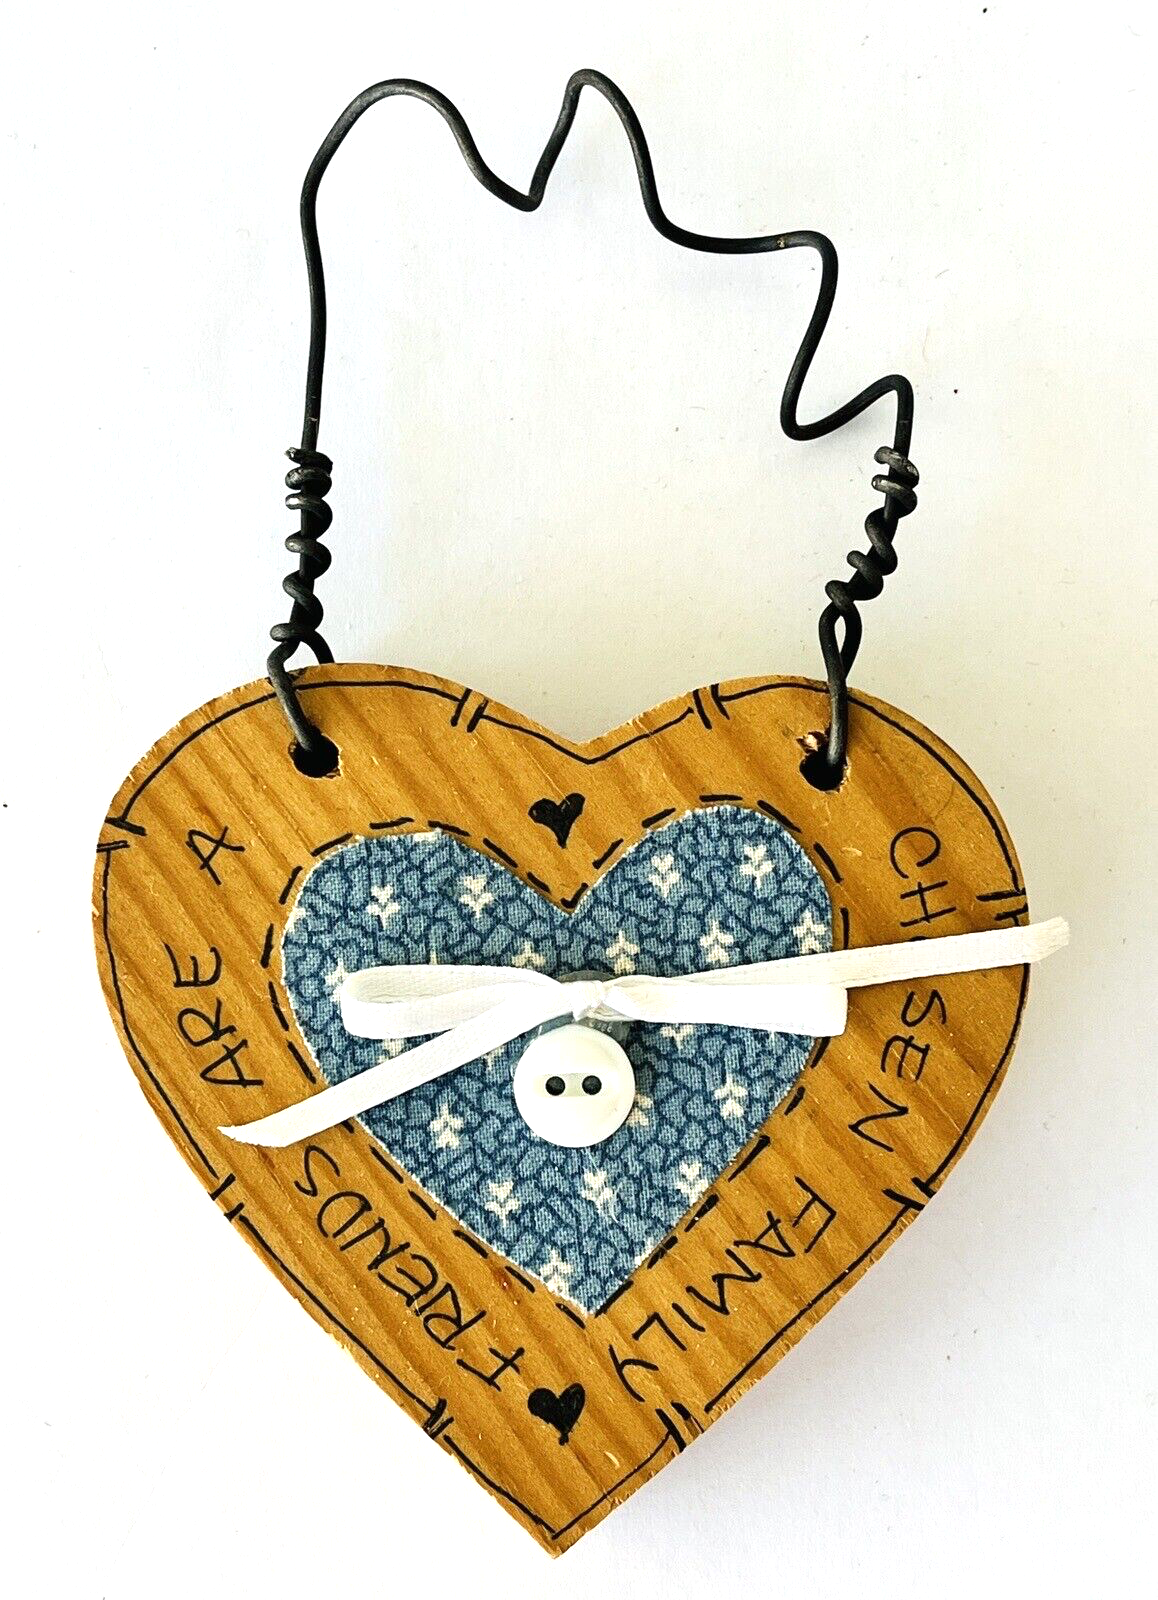 Primary image for Wood Heart Ornament Wall Decor Friends are a Chosen Family w/ Button Bow Fabric